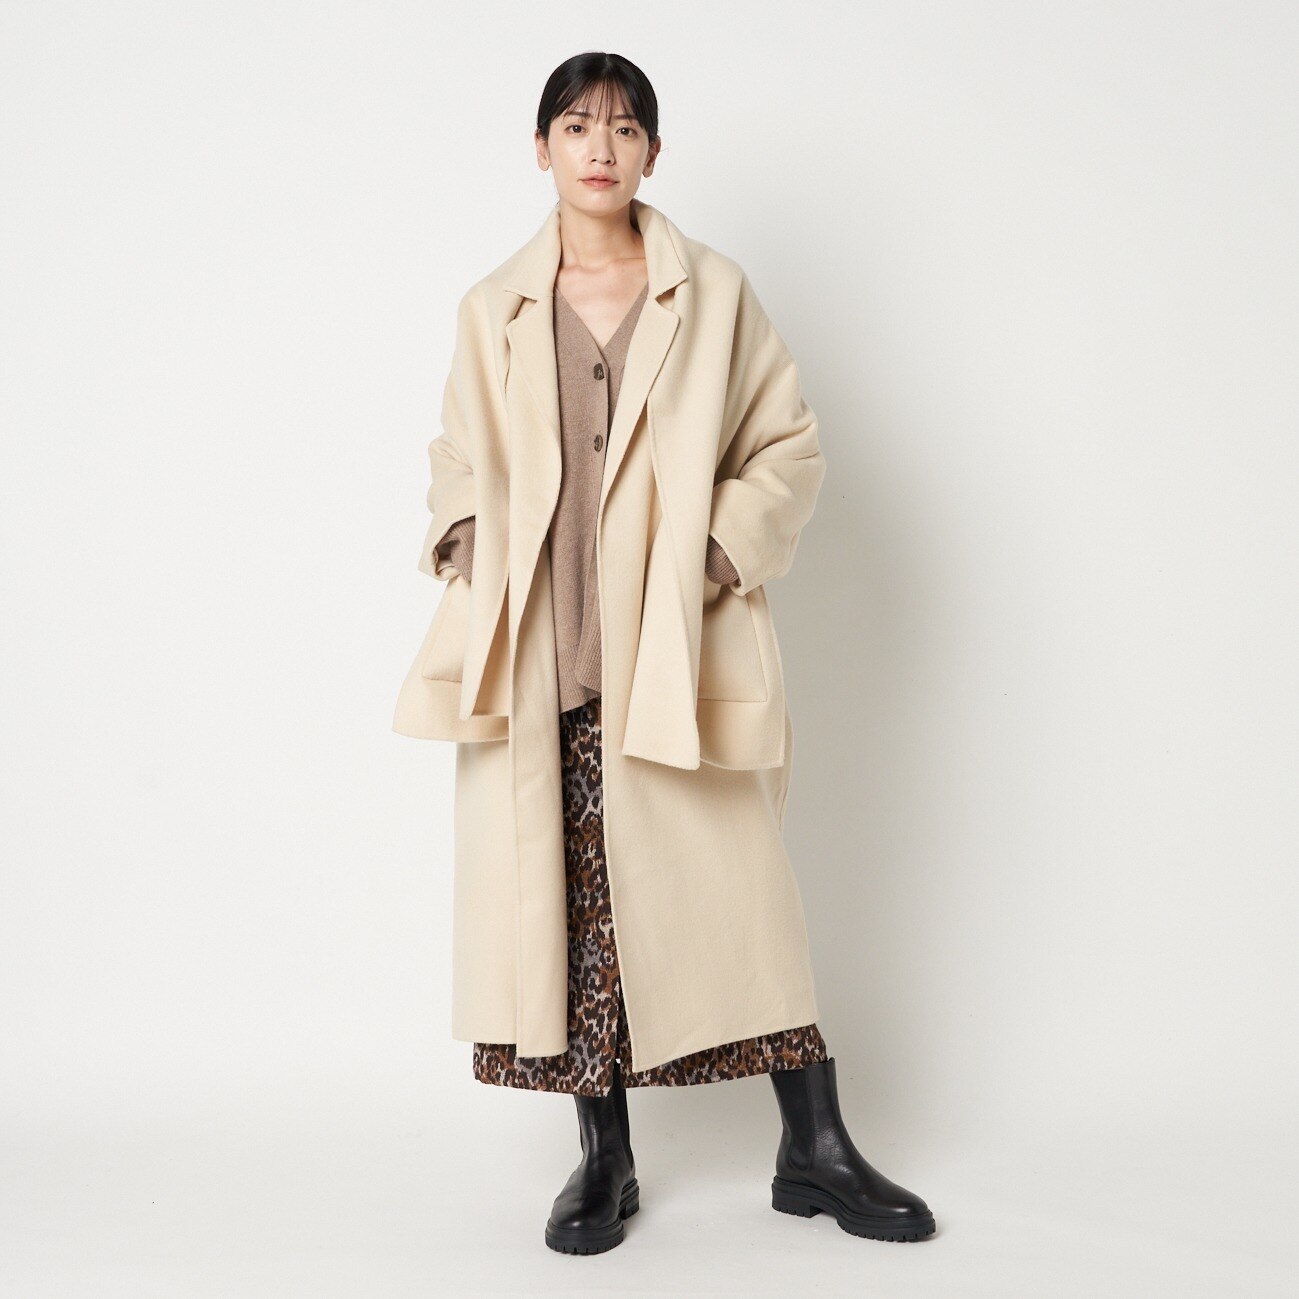 HELIOPOLE DOUBLE FACE COAT WITH STOLE|HELIOPOLE(エリオポール)の